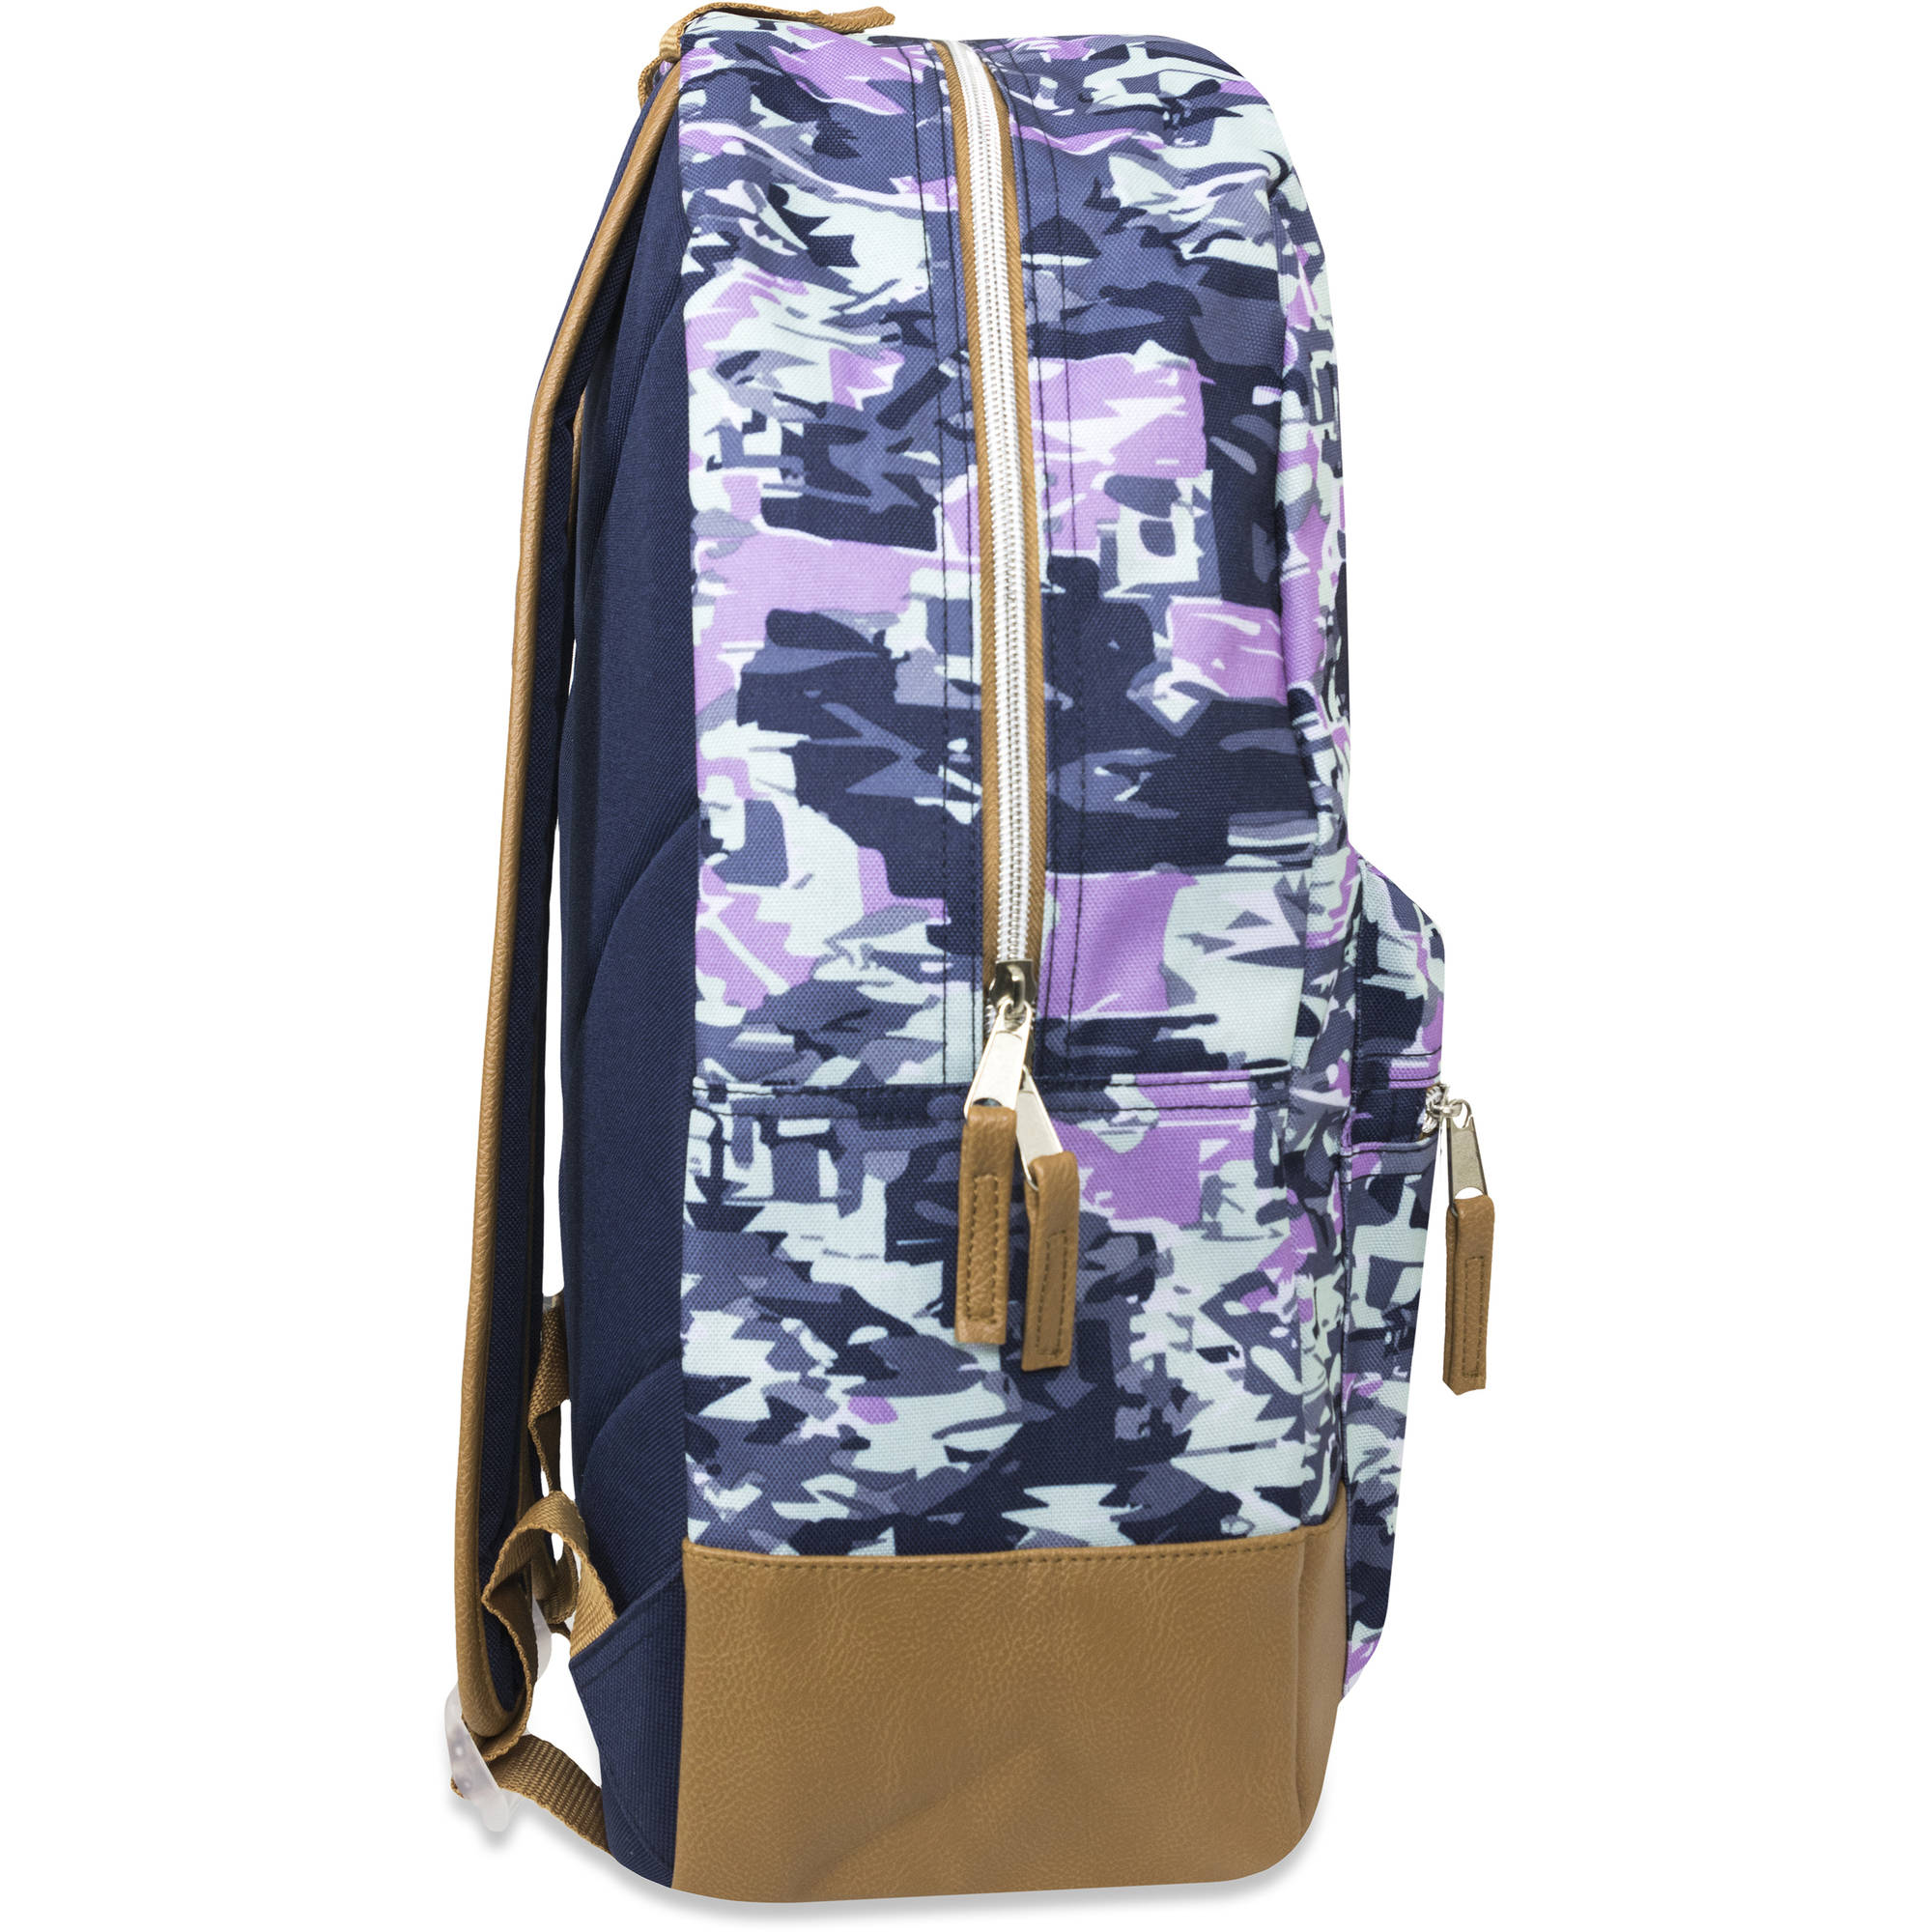 17.5 Inch Classic Backpack with Reinforced Vinyl Bottom and Comfort Padding - image 3 of 3